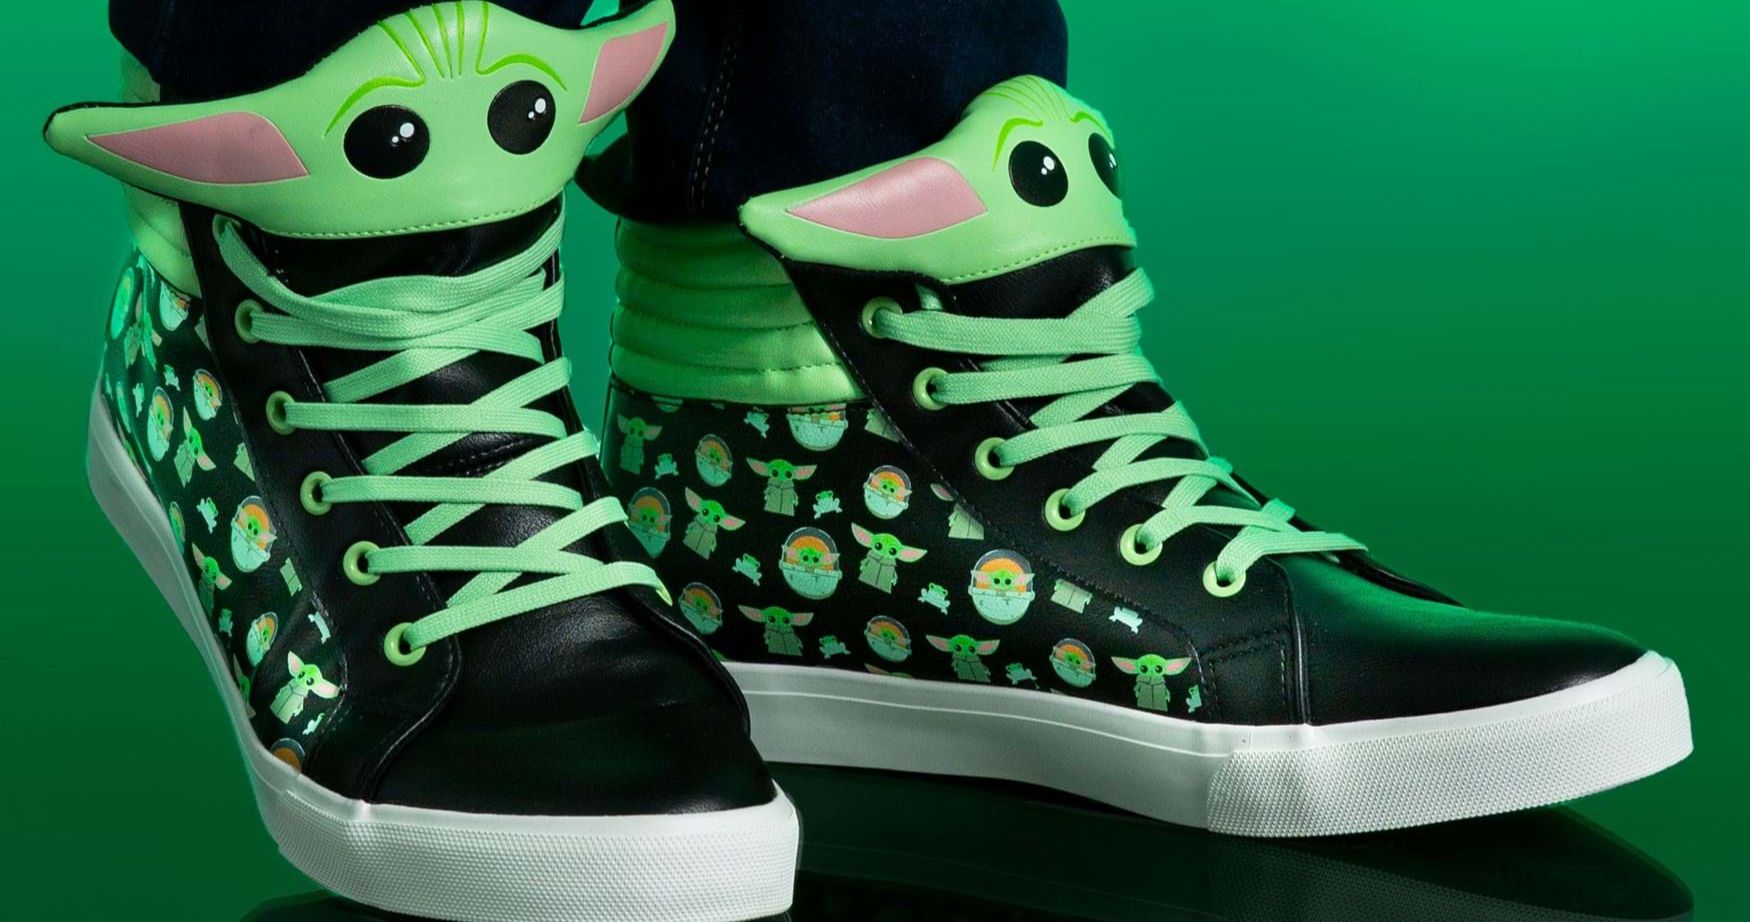 These New Baby Yoda Shoes Will Bring the Power of the Force to Your Feet